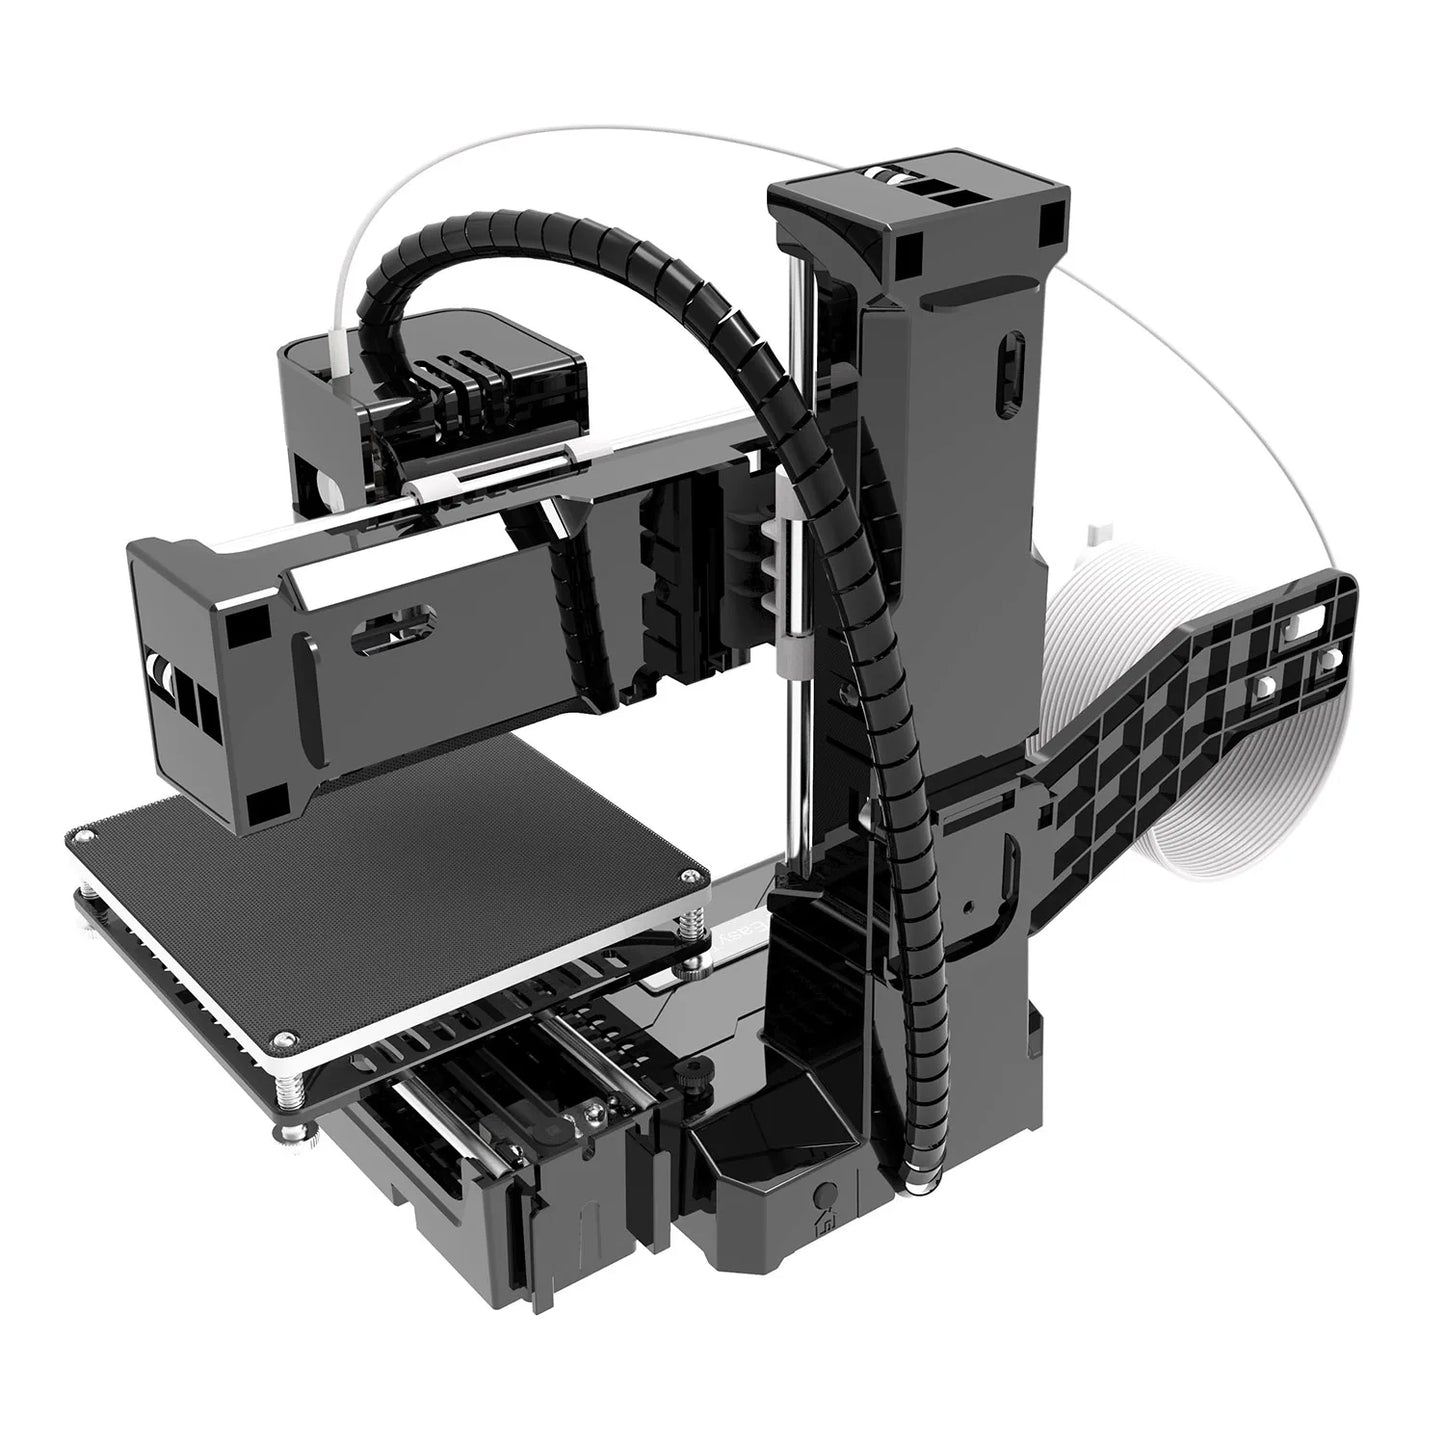 The Easy Thread K9 Mini 3D Printer is a powerful and user-friendly printer that makes 3D printing easy and efficient. With its easy thread function, you can quickly and effortlessly change filament, saving you time and hassle. Enjoy high-quality prints and bring your ideas to life with this advanced printer.